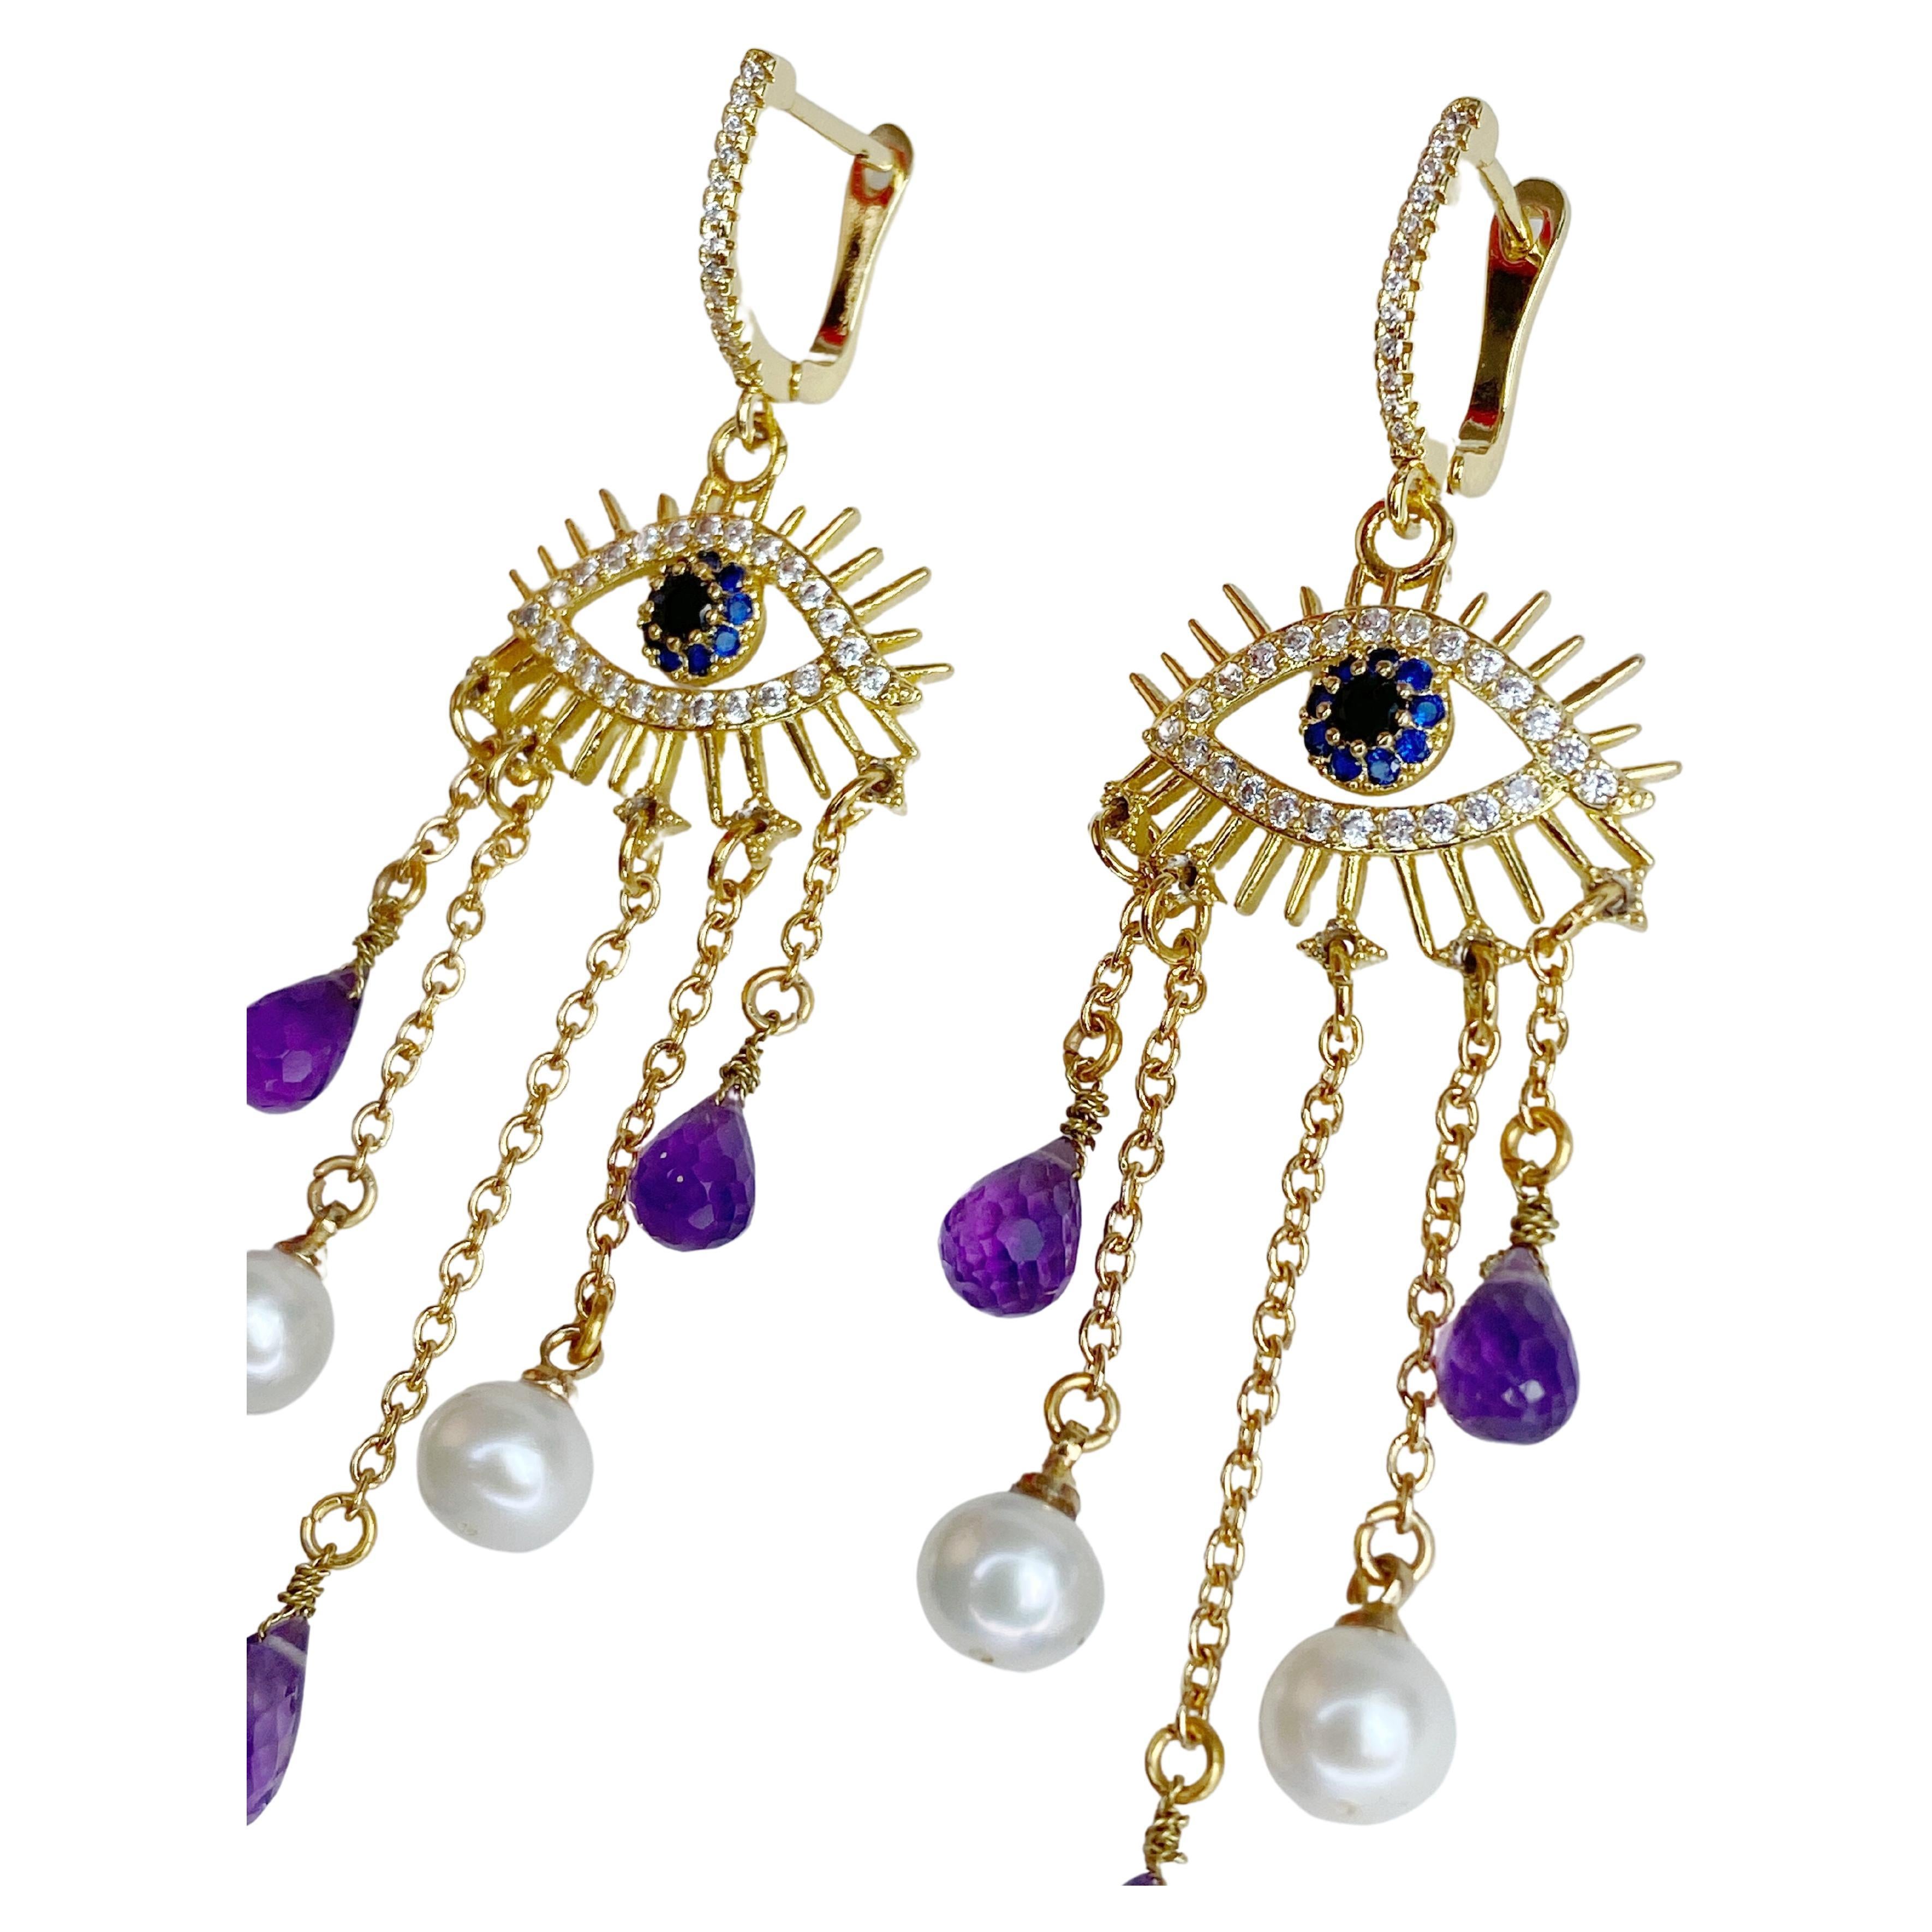 This whimsical pair of gold plated earrings feature Swarovski crystals and drop strands set with natural faceted Amethyst and freshwater pearls.  Lightweight yet eye catching design make these earrings a fun and elegant alternative.